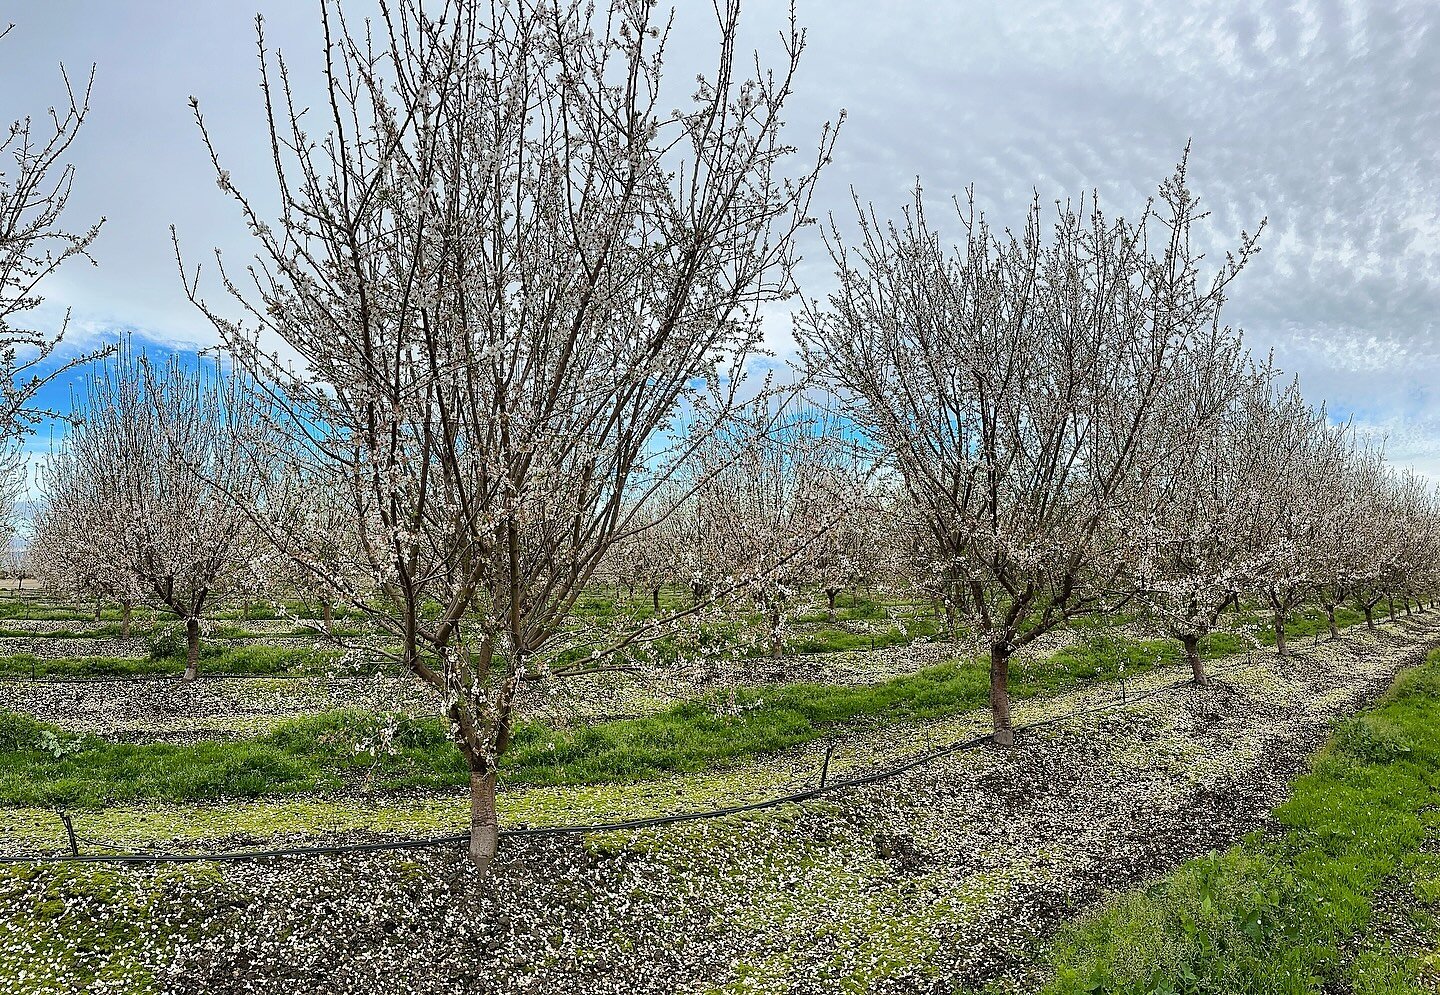 These almond trees are growing up!